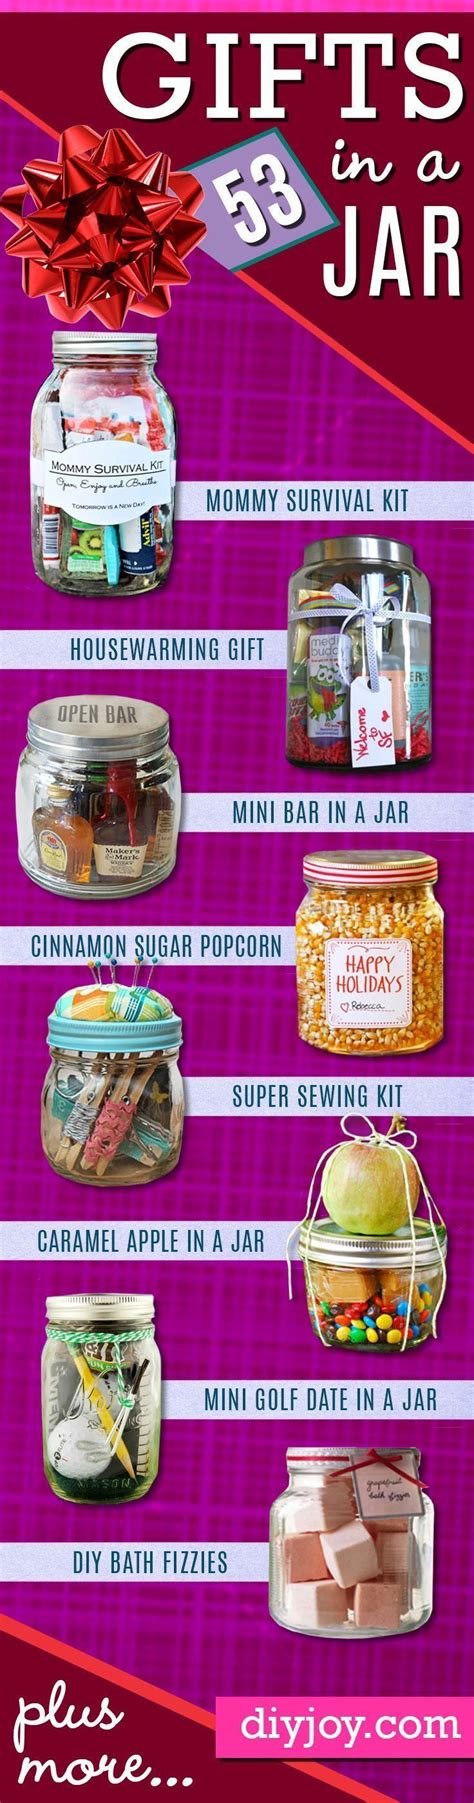 Best Homemade DIY Gifts in A Jar | Best Mason Jar Cookie Mixes and Recipes, Alcohol Mixers | Fun ...